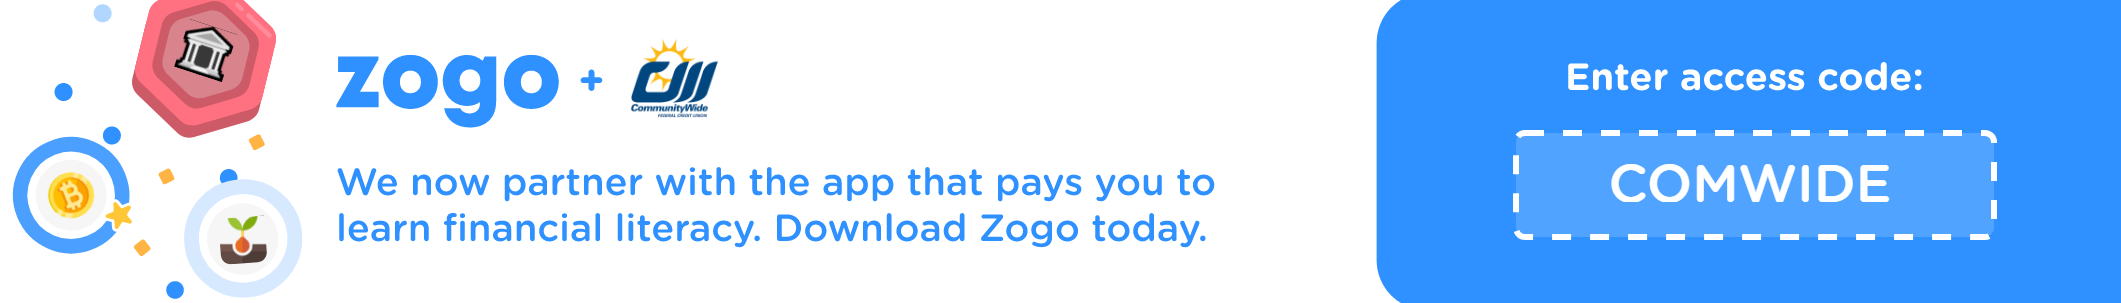 Download Zogo to learn more financial literacy